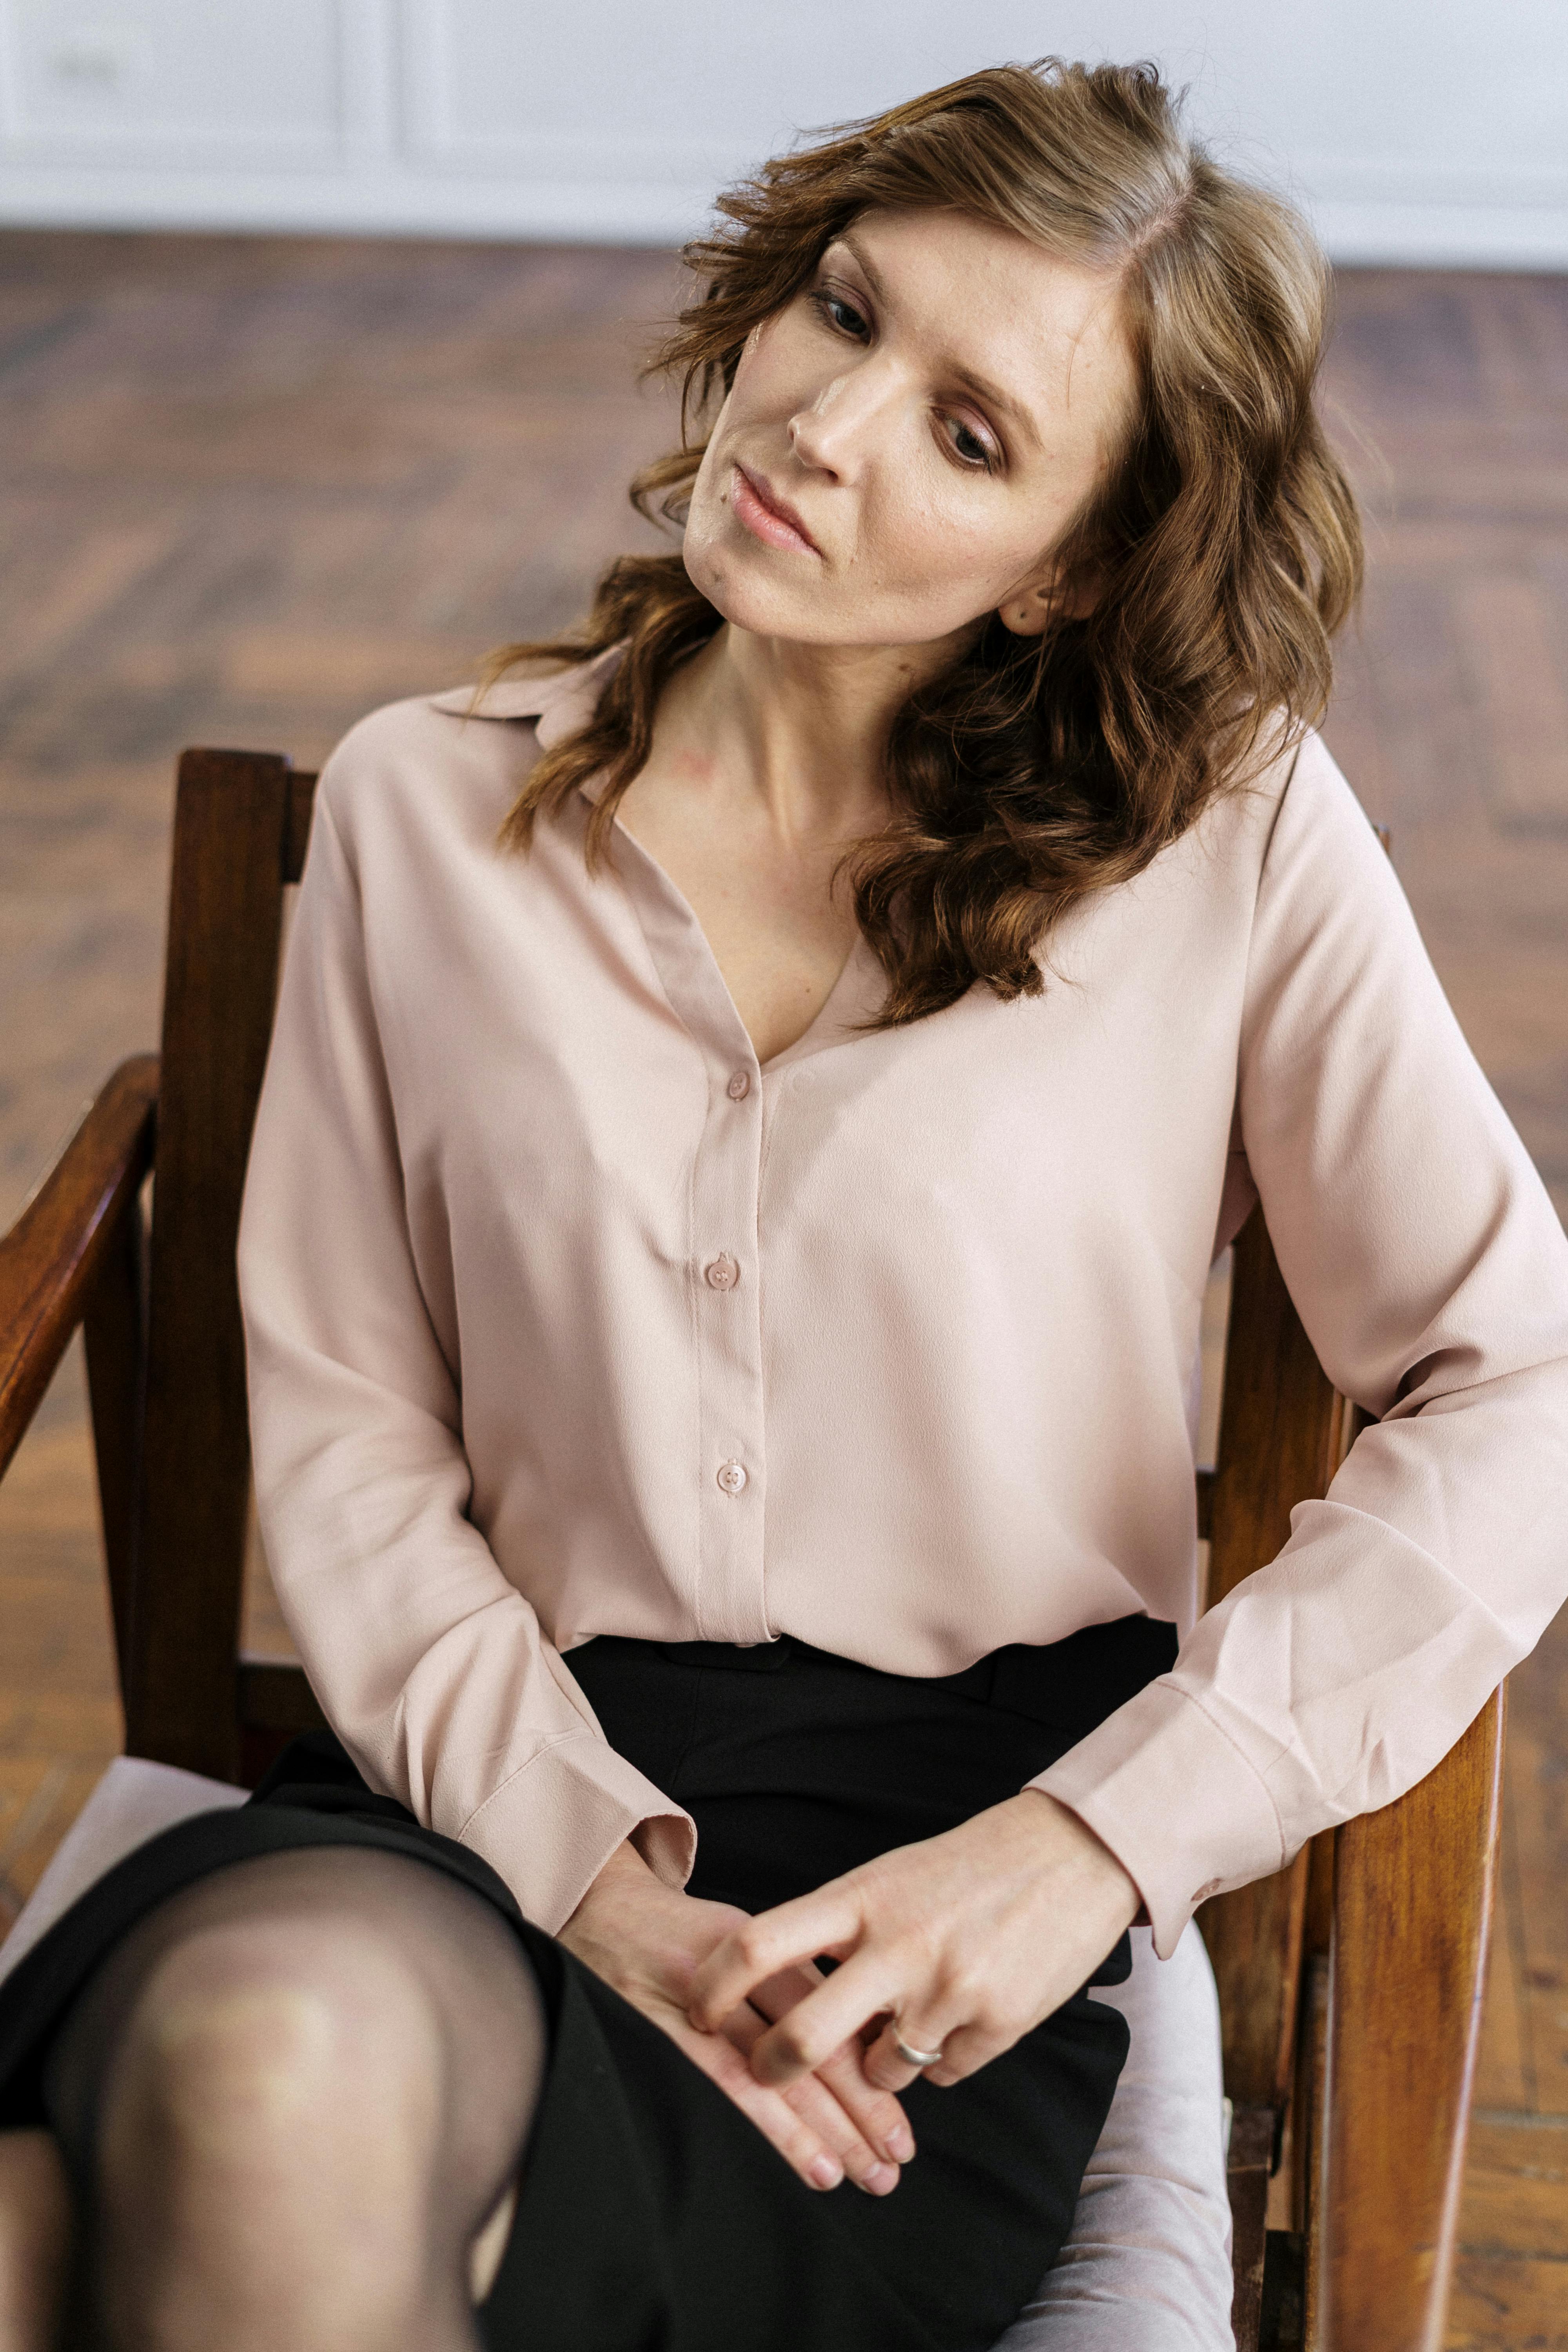 woman in white dress shirt and black pants sitting on brown wooden chair